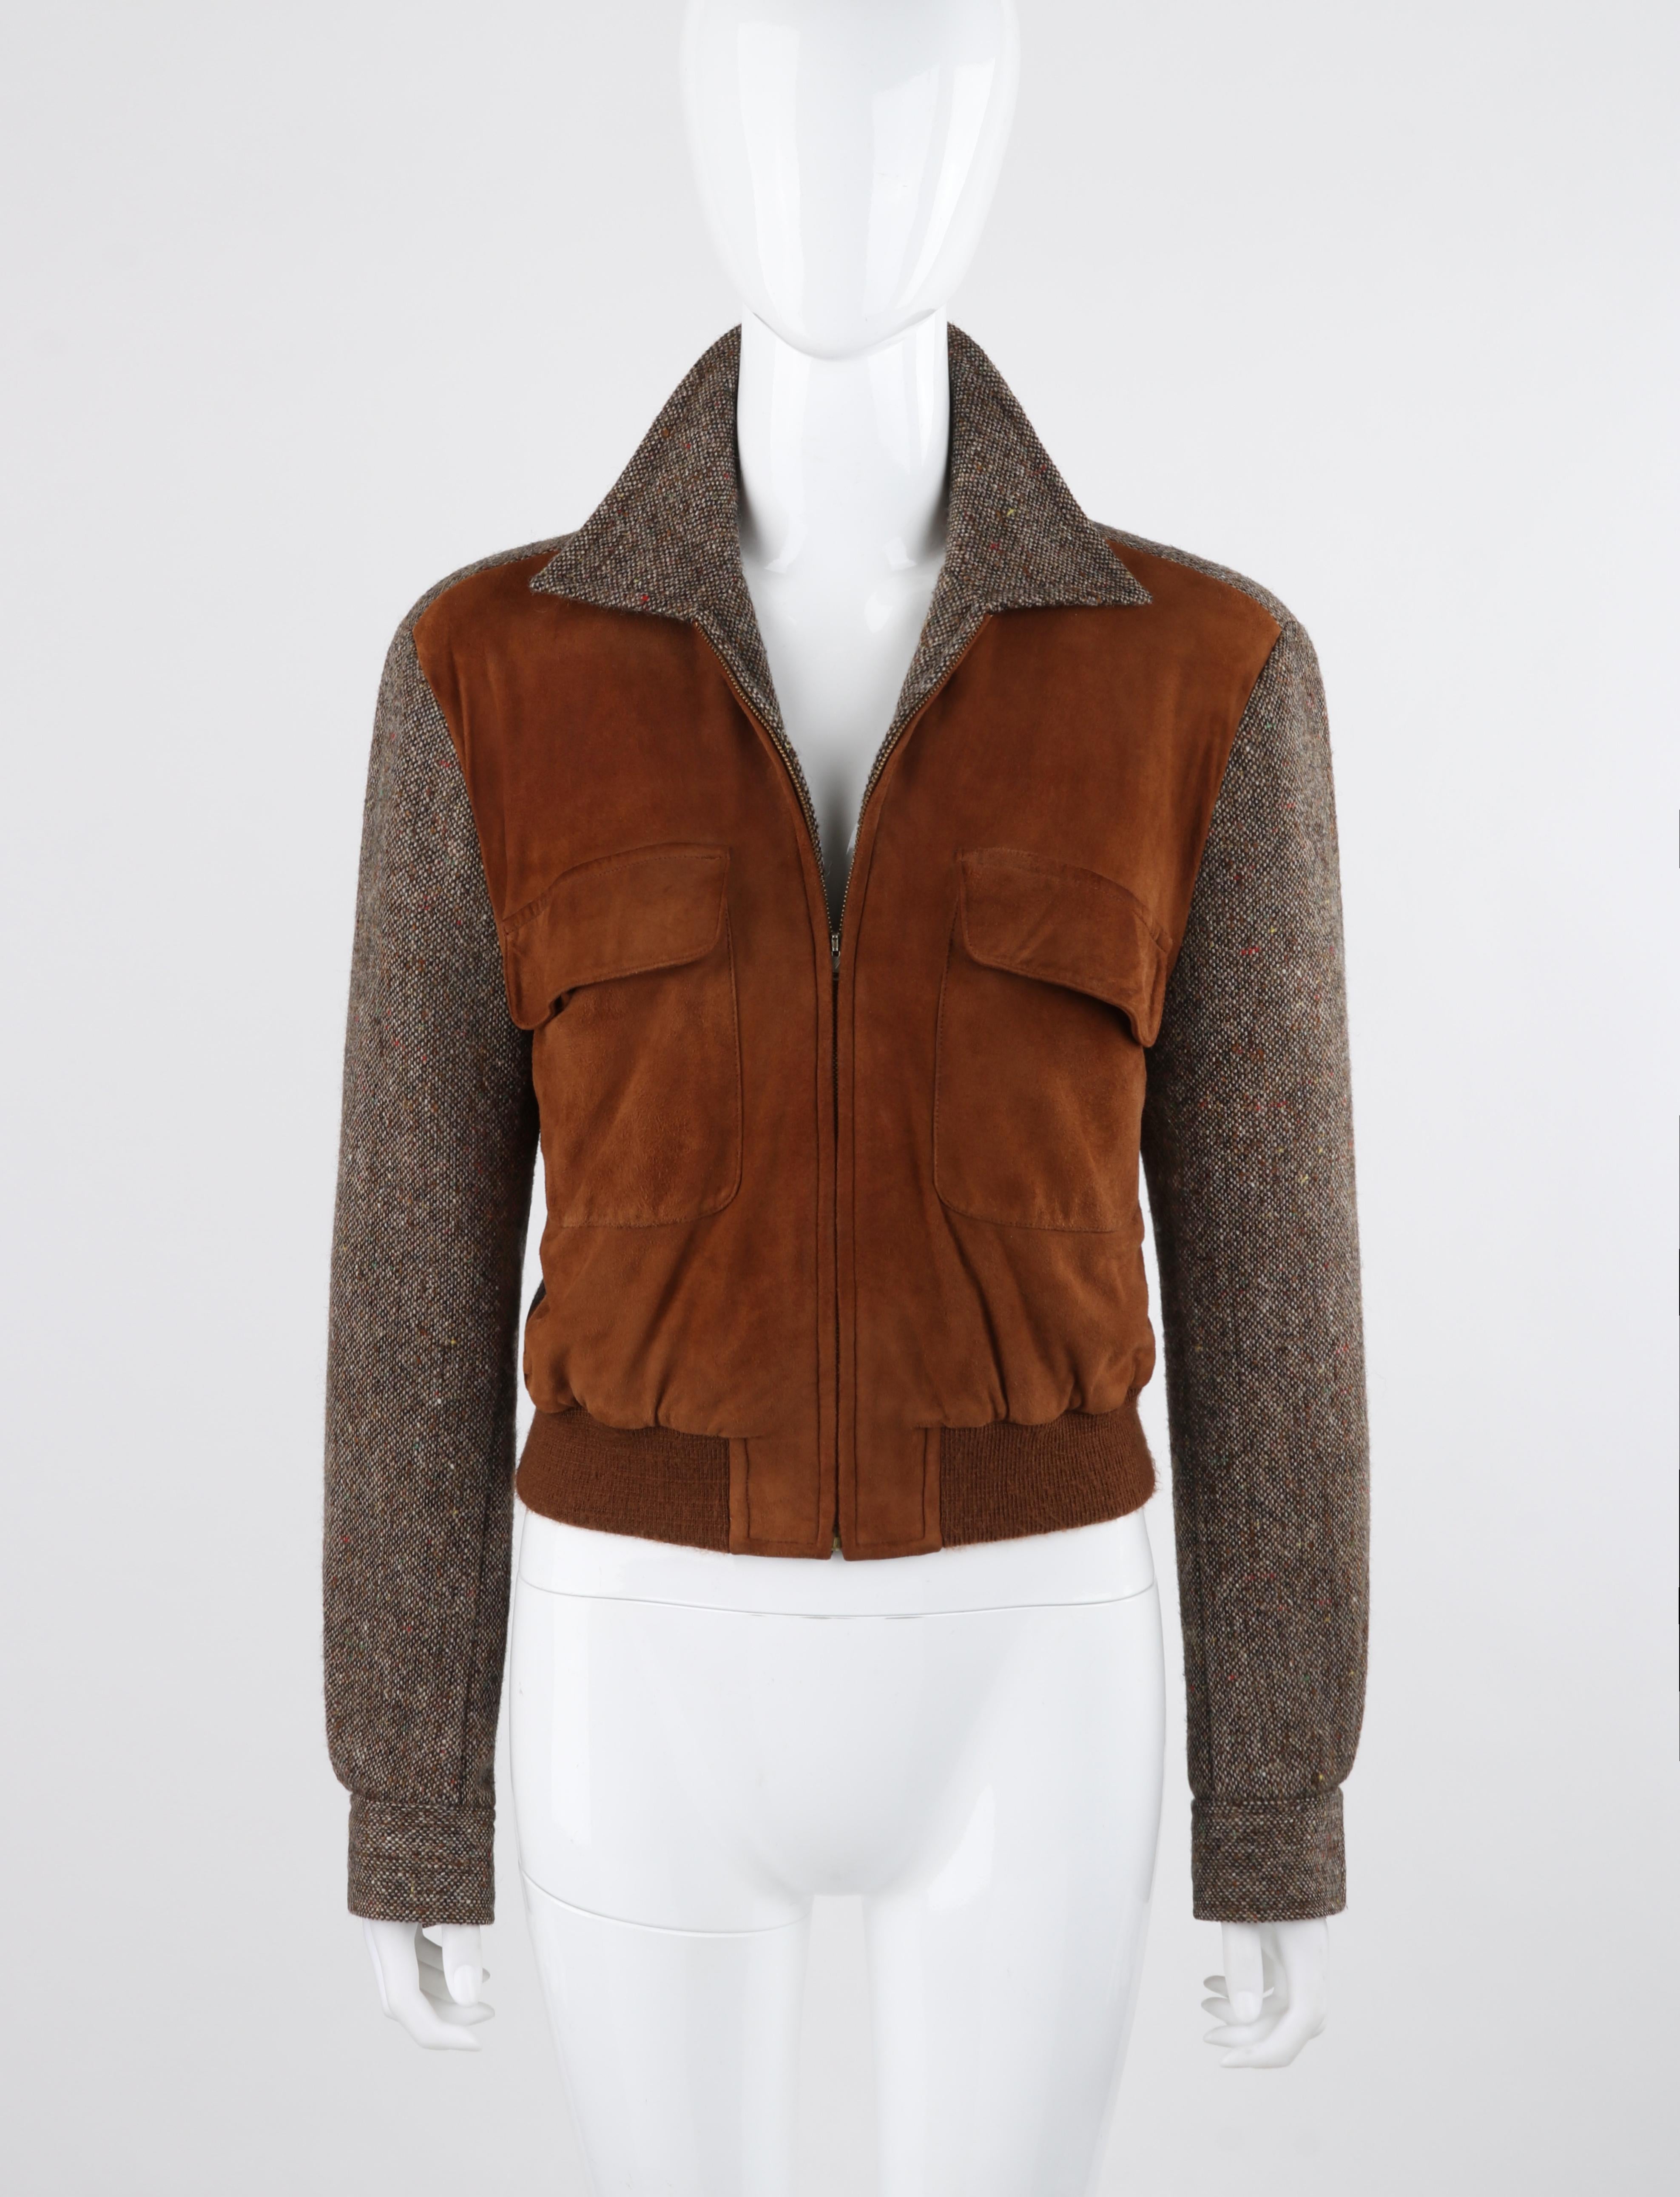 RALPH LAUREN c.1970’s Brown Wool Tweed Suede Leather Crop Blouson Bomber Jacket

Brand / Manufacturer: Ralph Lauren
Circa: 1970s
Style: Blouson Bomber Jacket
Color(s): Shades of brown, beige
Lined: Yes
Marked Fabric Content: 100% wool (collar,